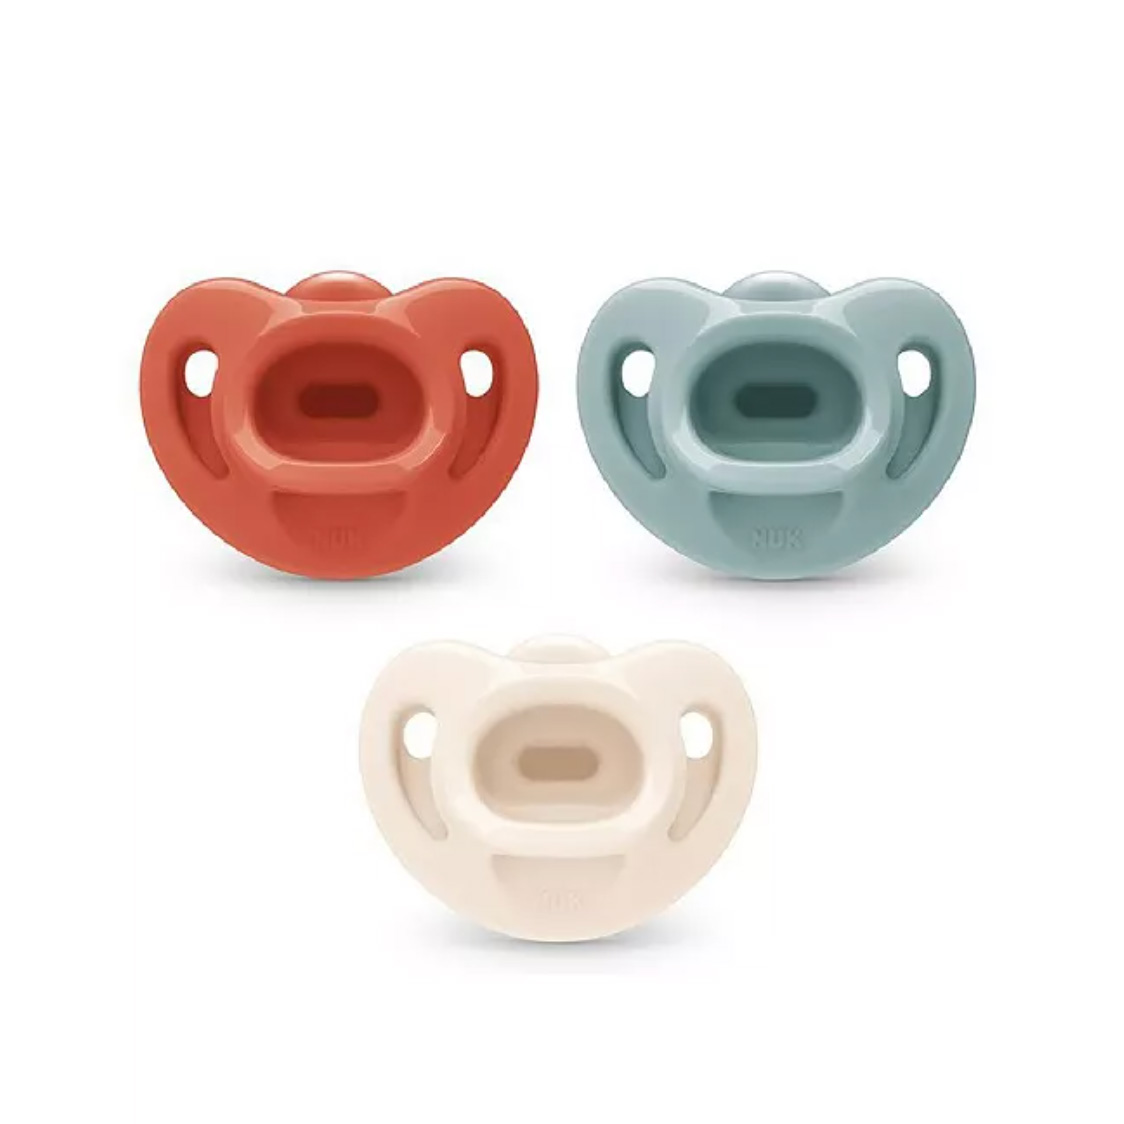 Three colorful pacifiers